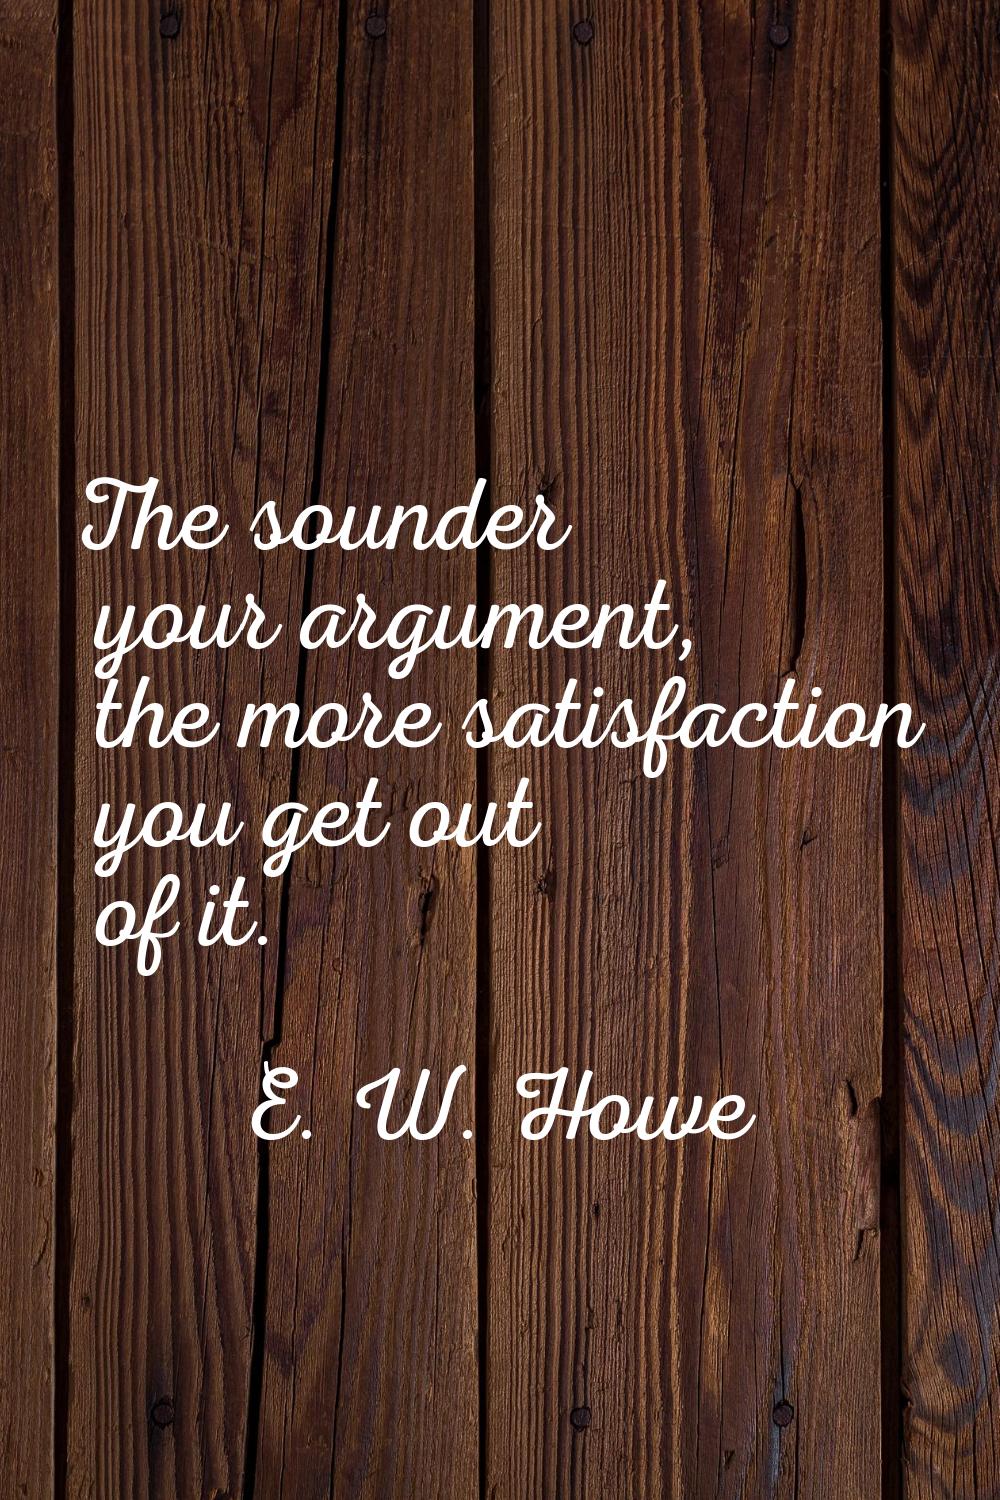 The sounder your argument, the more satisfaction you get out of it.